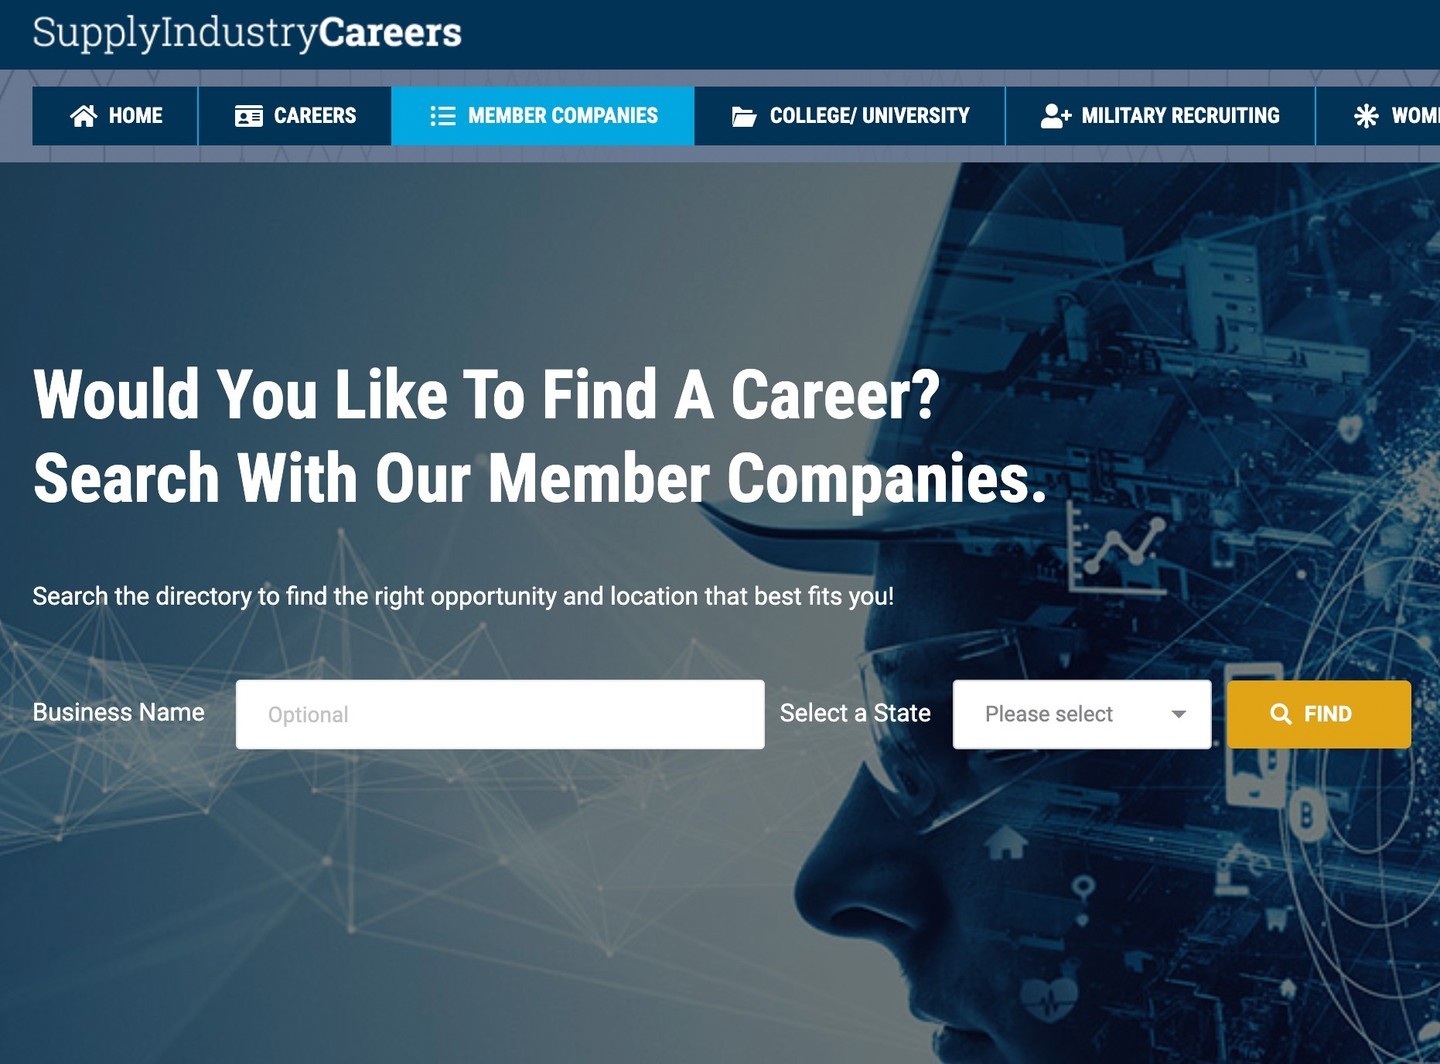 Have you checked out our member database? This is a great resource to find a career in your local area. https://supplyindustrycareers.com/member-companies/